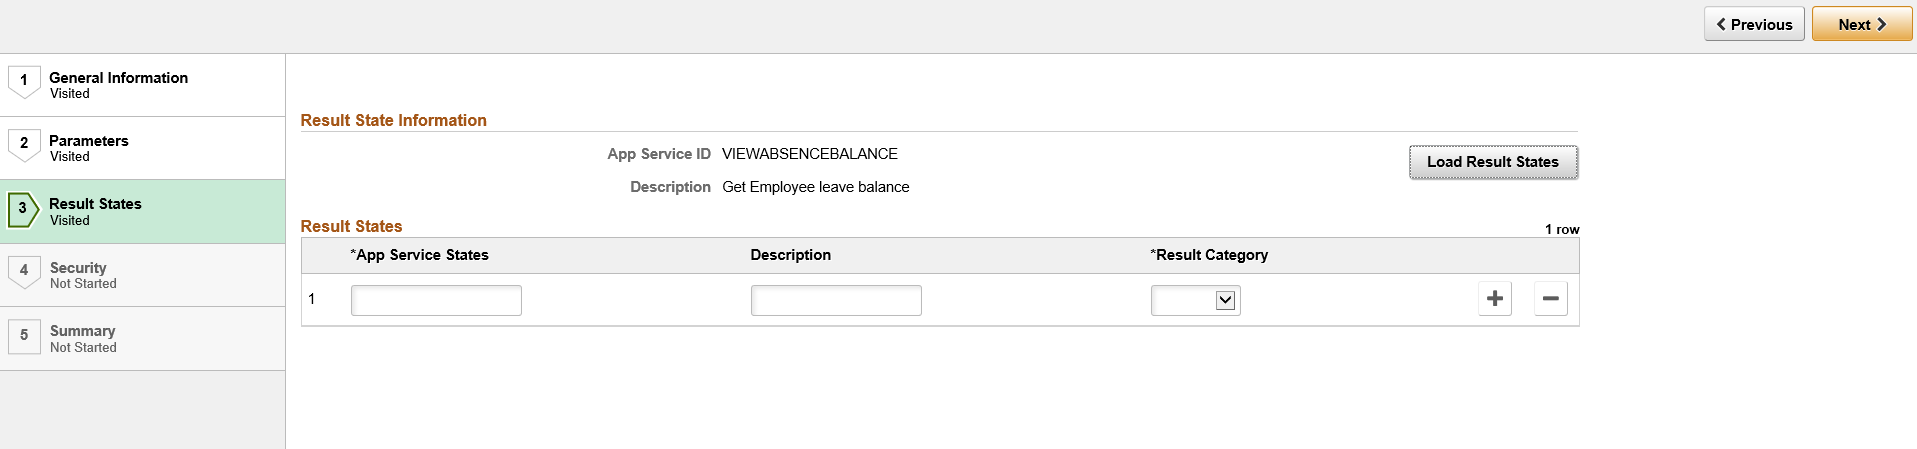 Step 3 - Application Service Registration Wizard - Result States Page